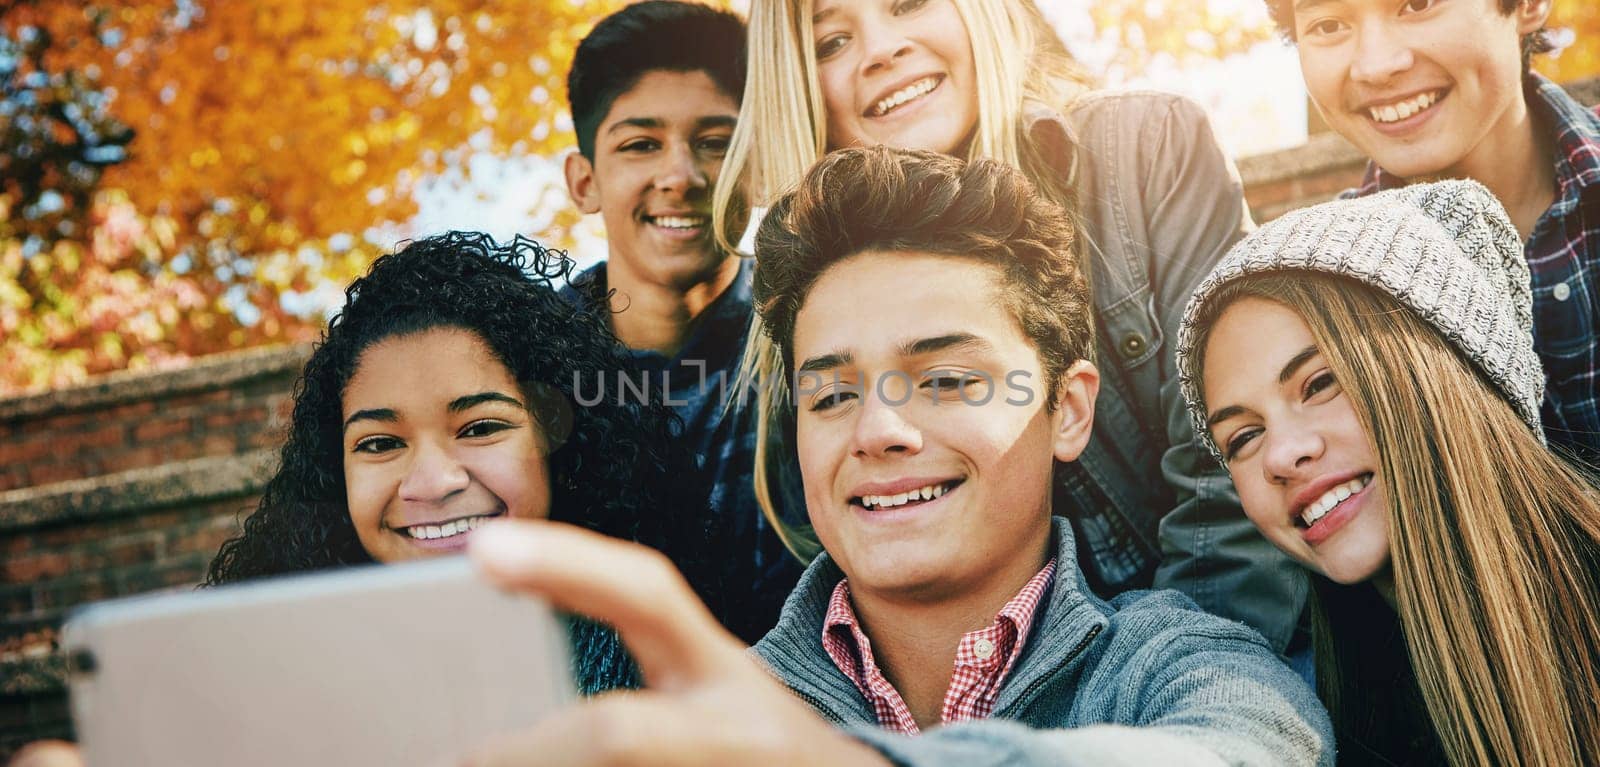 Smile, friends and a selfie in nature for bonding, fun and video call in autumn. Happy, together and diversity of kids taking a photo on technology in a park for social media or live streaming by YuriArcurs